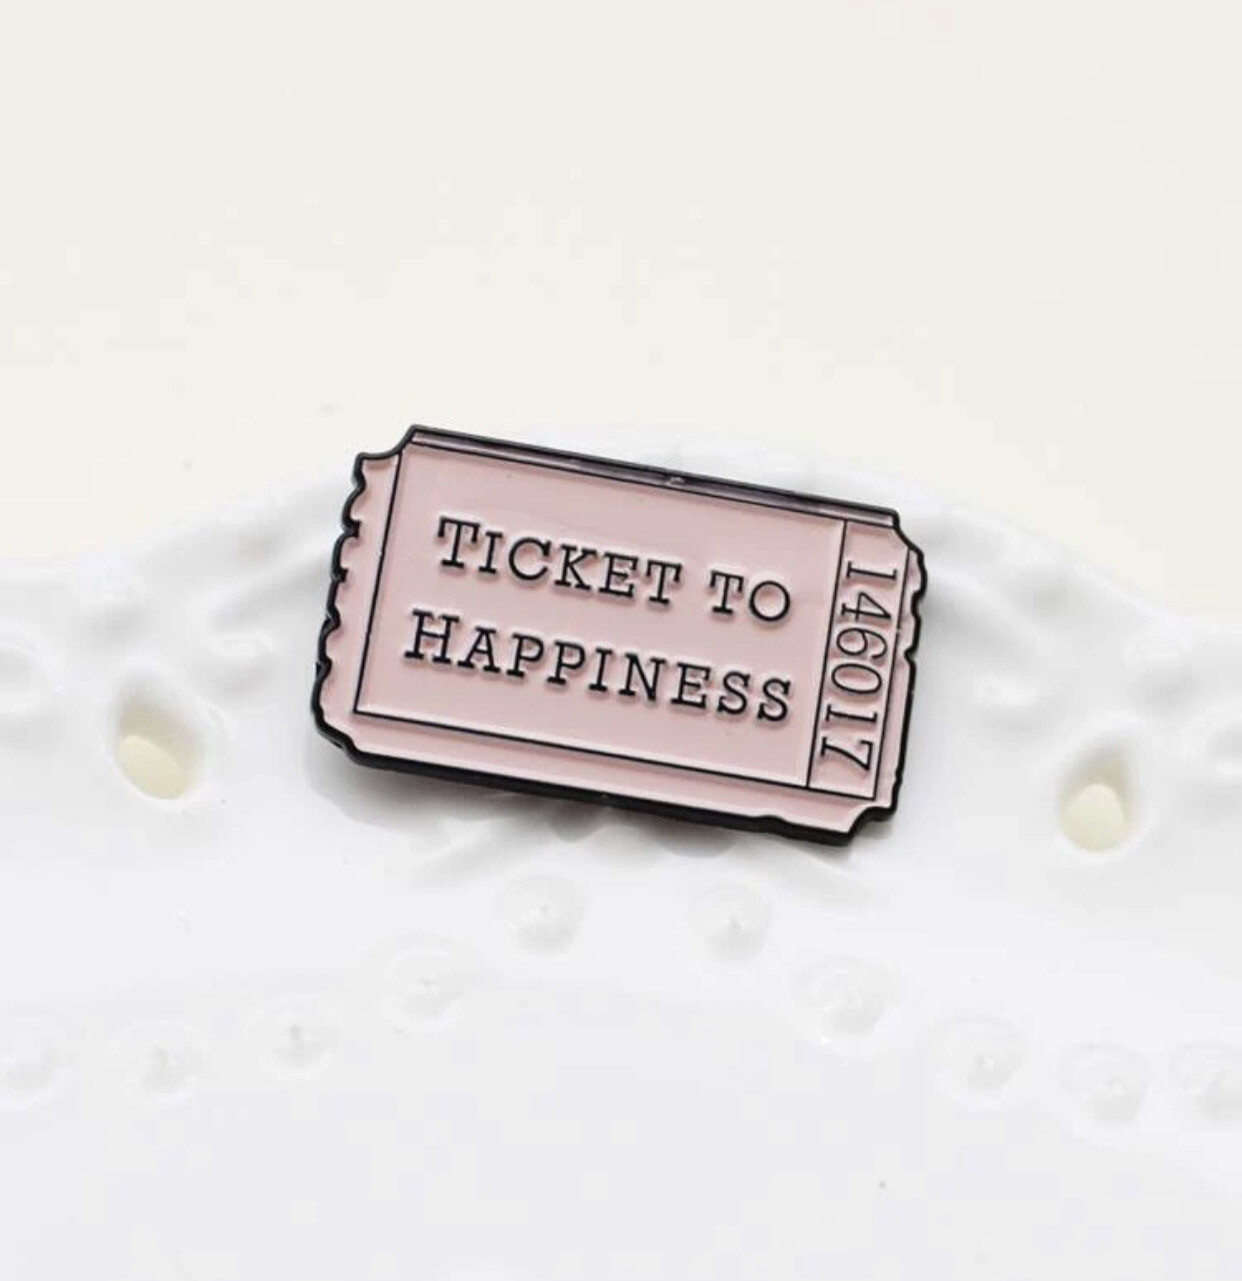 Pin Ticket to Happiness